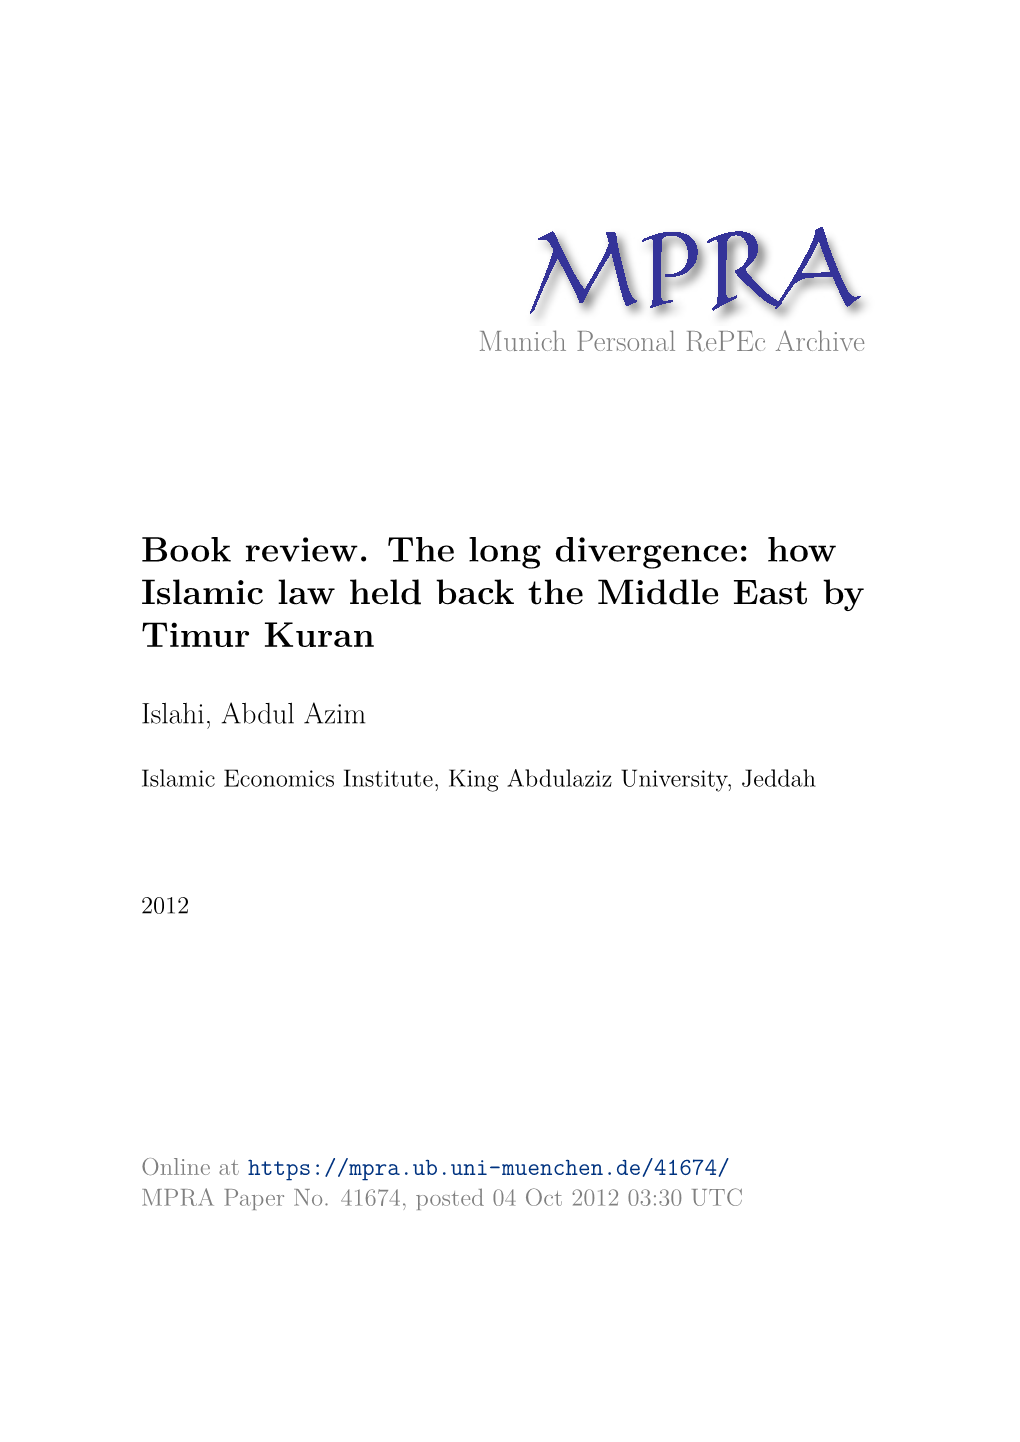 Book Review. the Long Divergence: How Islamic Law Held Back the Middle East by Timur Kuran